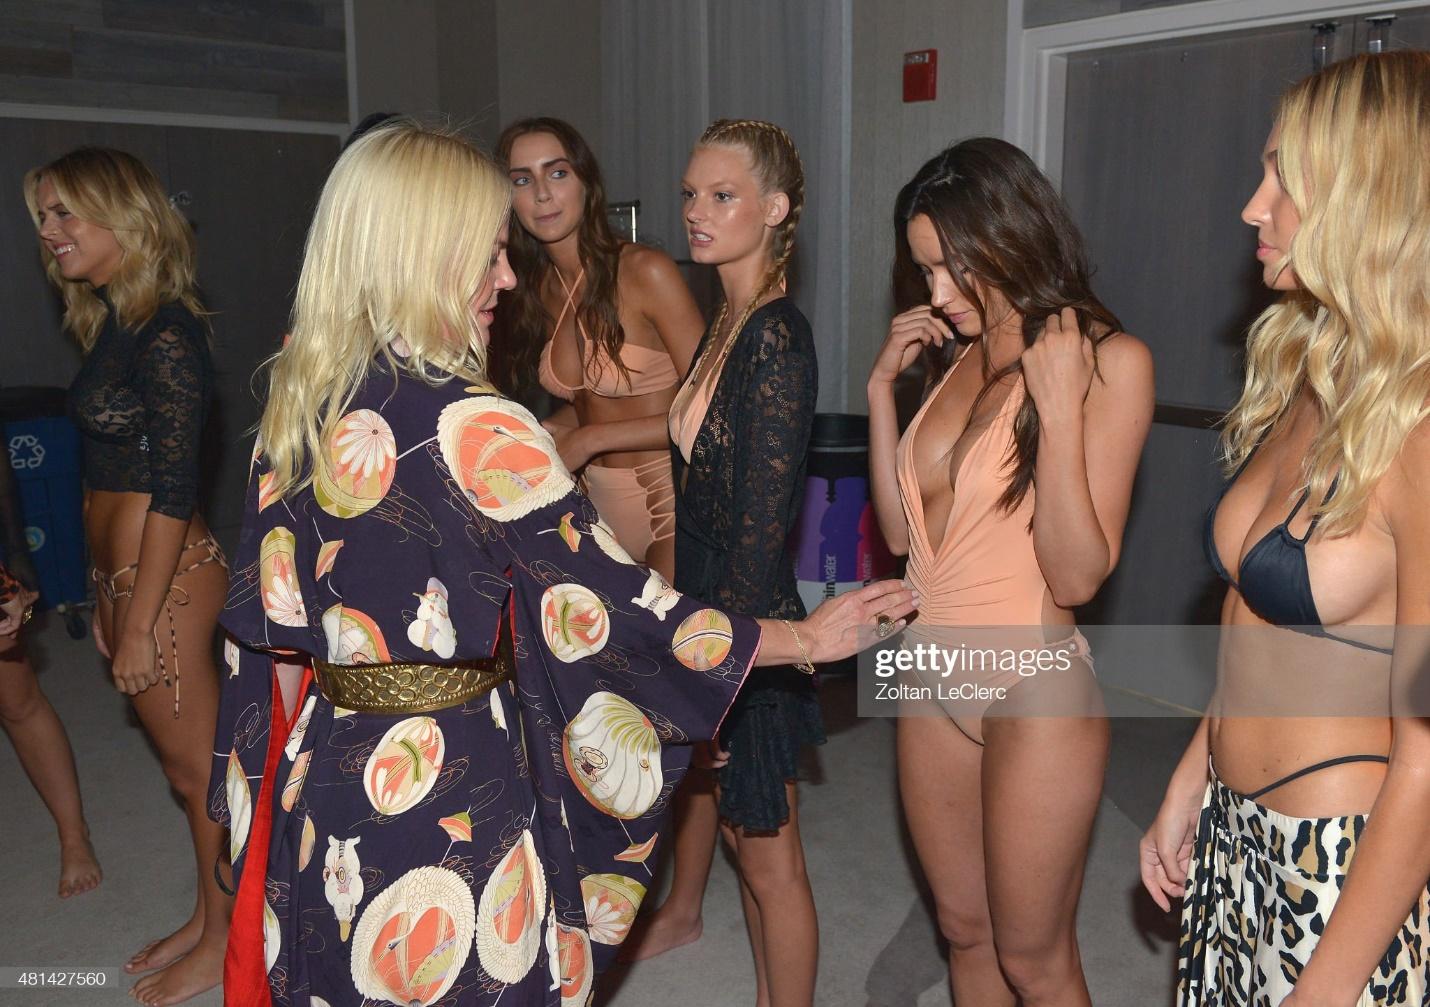 D:\Documenti\posts\posts\Miami\New folder\donne\designer-sharleen-ernster-lazear-and-models-prepare-backstage-at-the-picture-id481427560.jpg